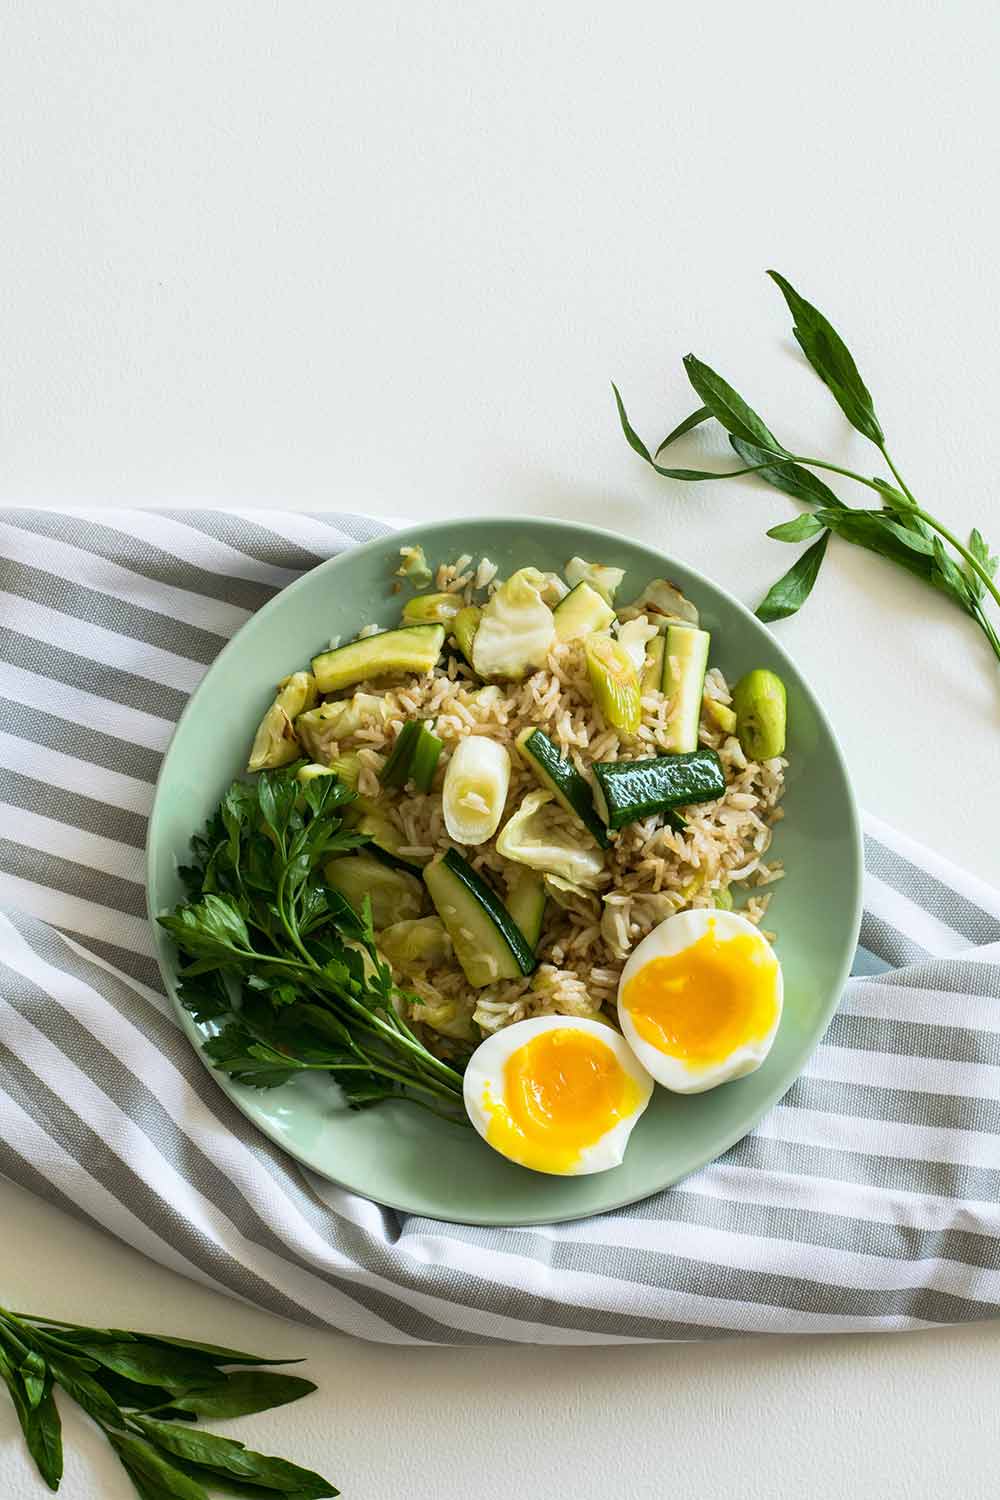 Green plate filled with foods like rice, zucchini, greens and an egg on top of a striped kitchen towel with greenery around it.